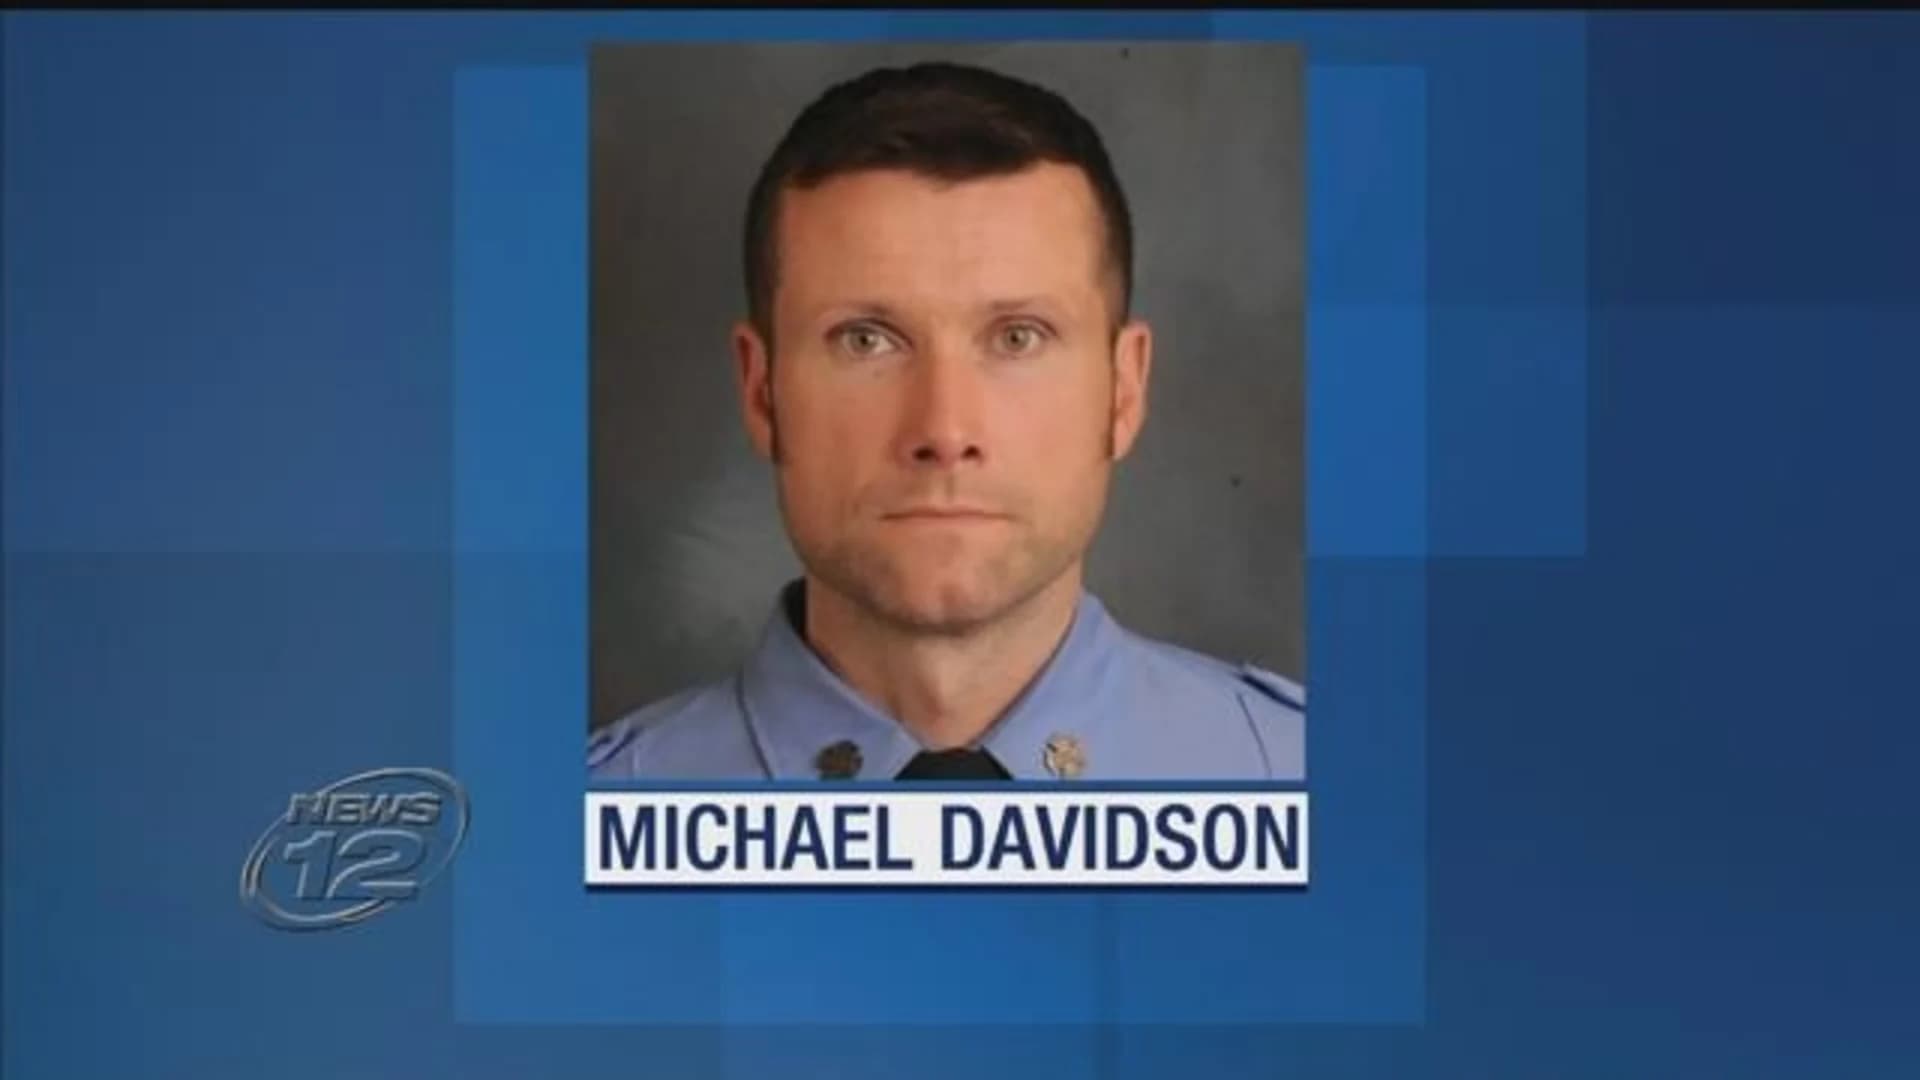 FDNY firefighter from Floral Park killed in Harlem fire